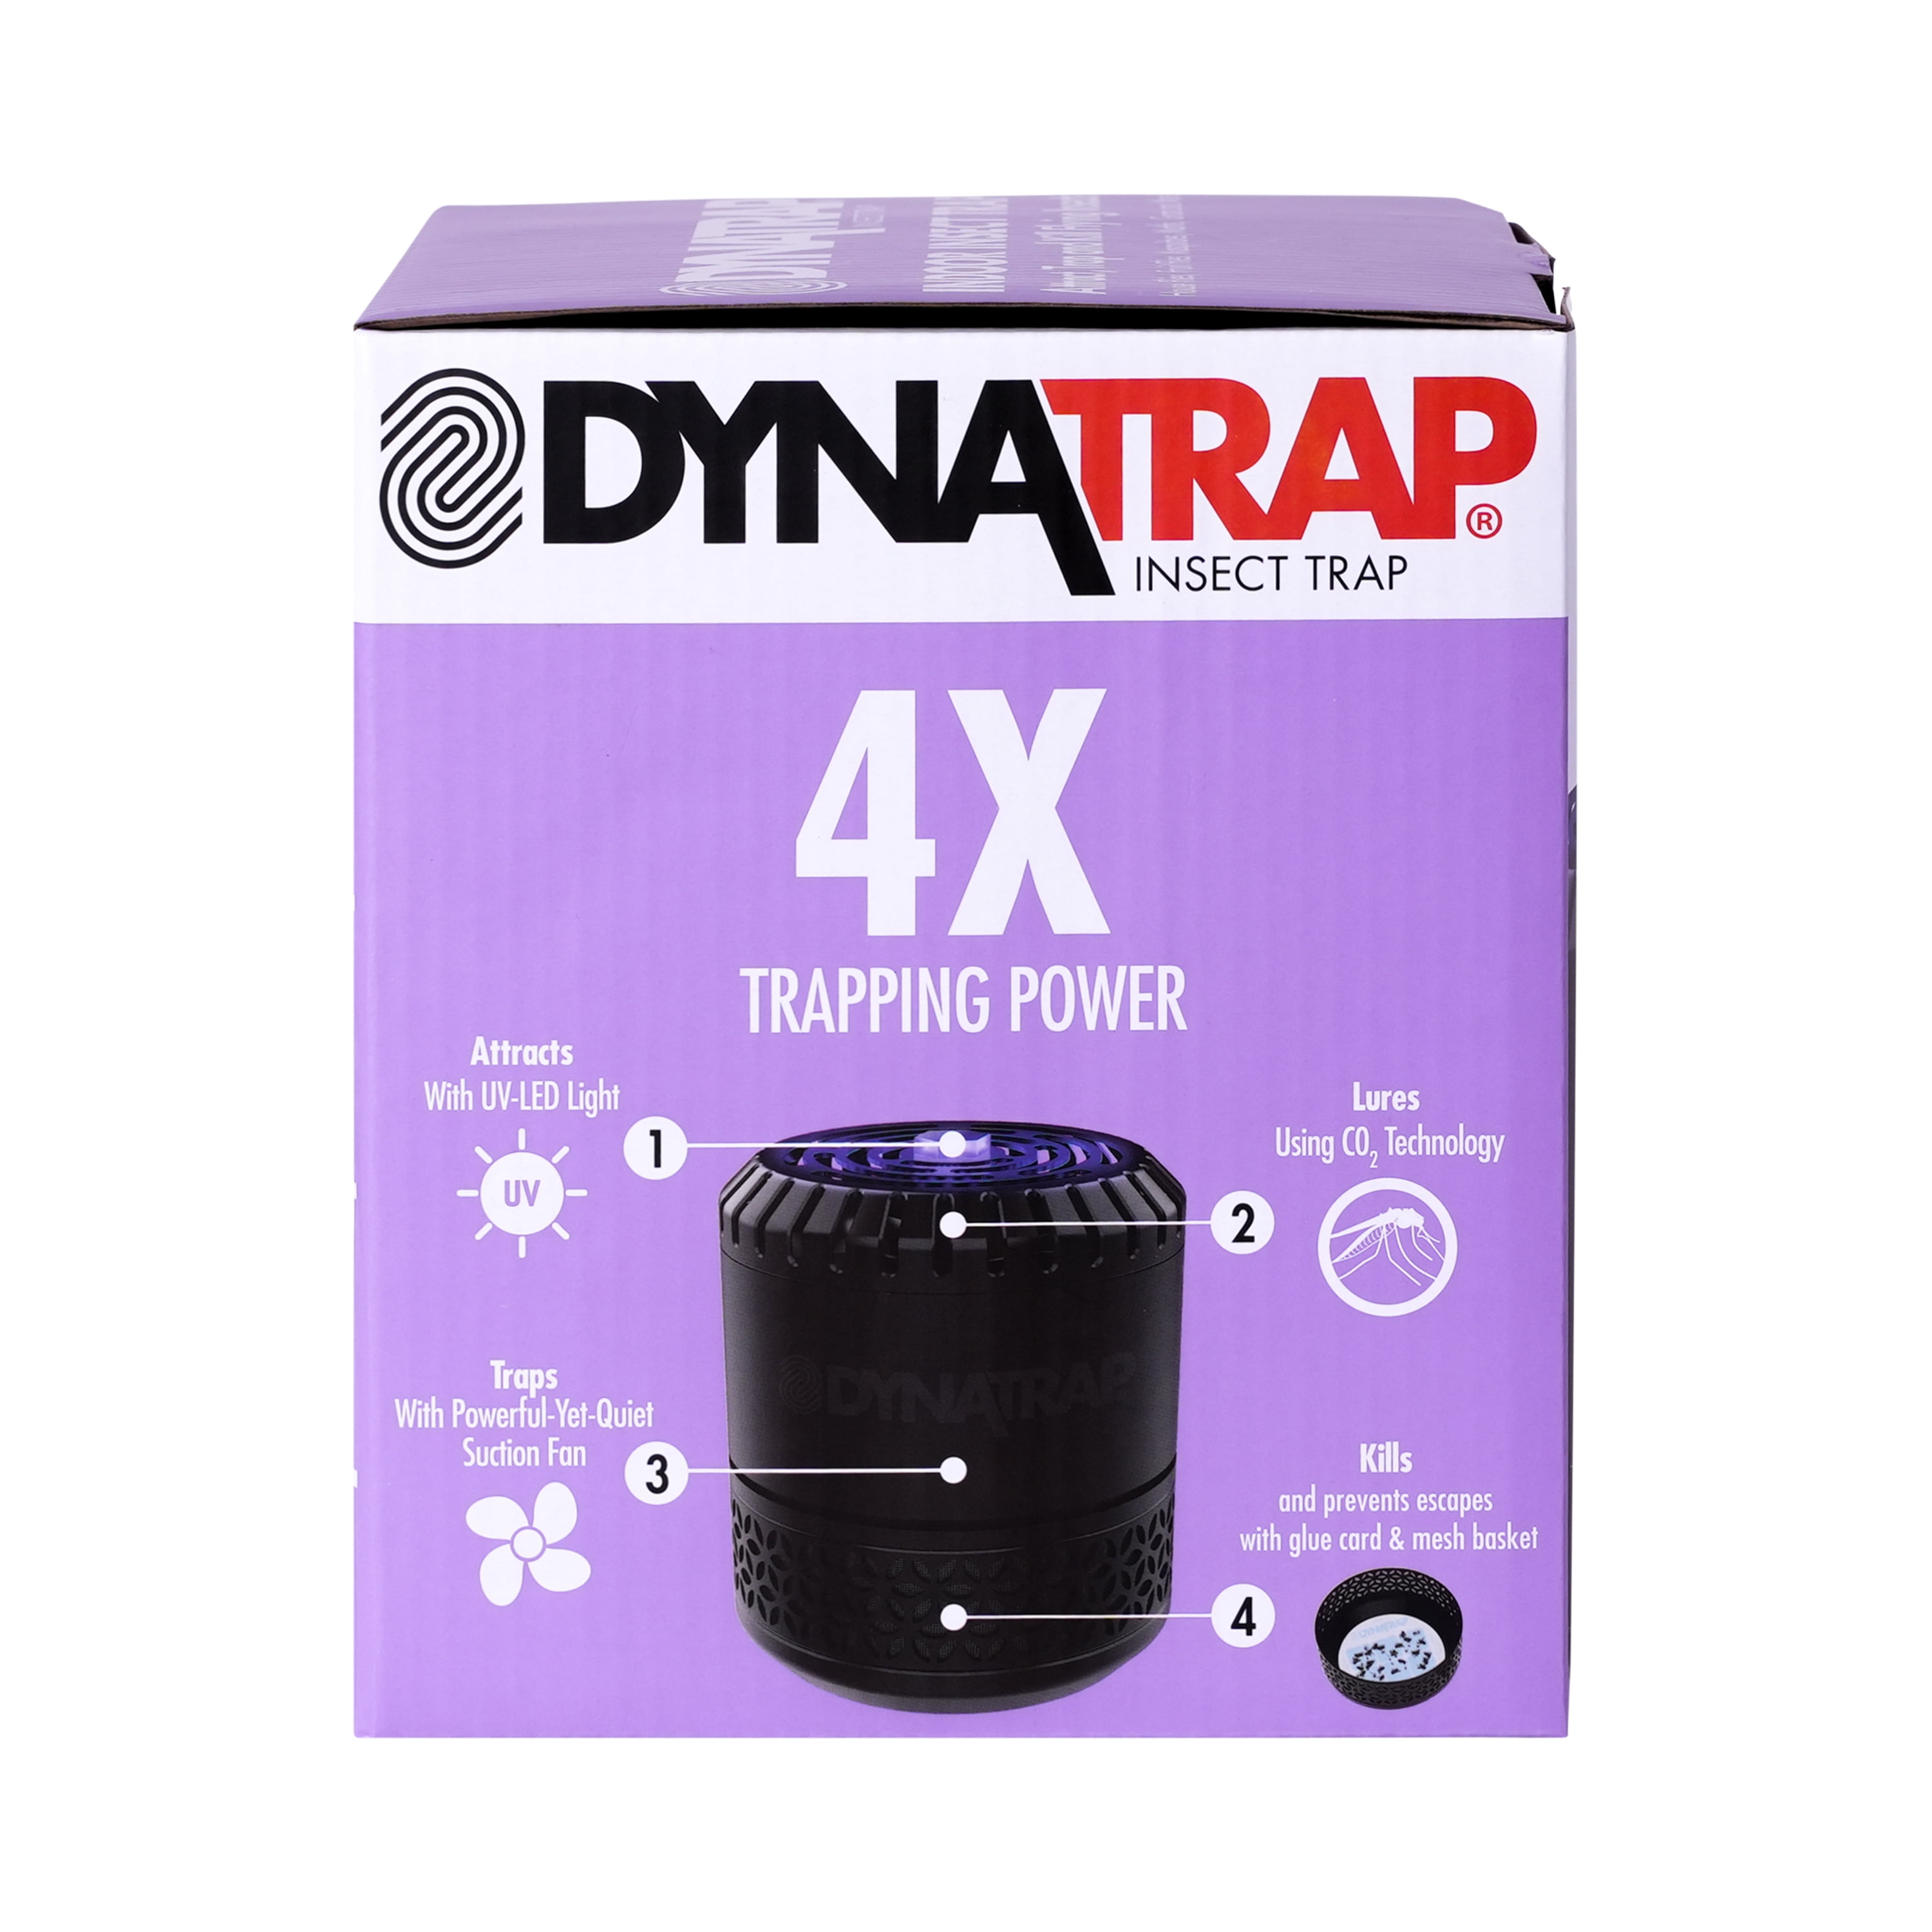 Dynatrap Indoor Insect Trap - Bed Bath & Beyond - 12474537